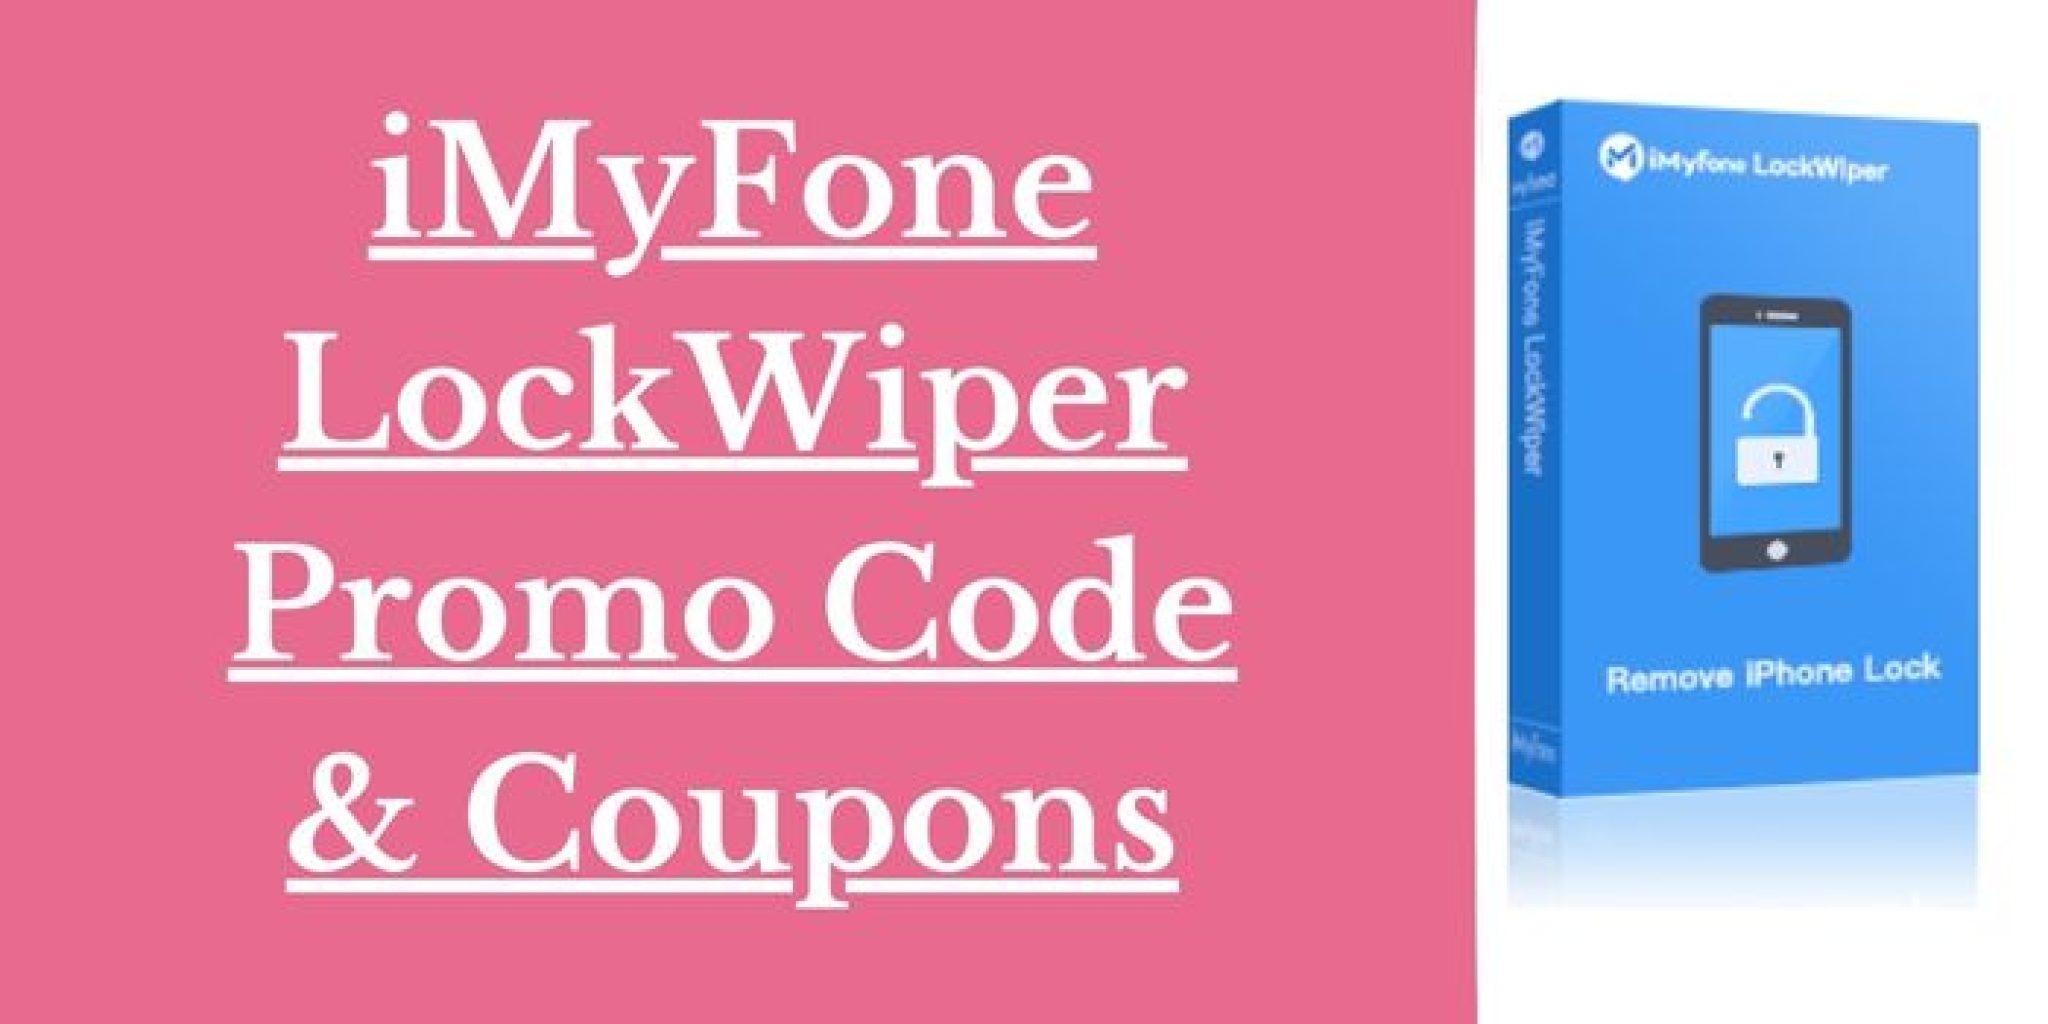 imyfone lockwiper registration code and email free